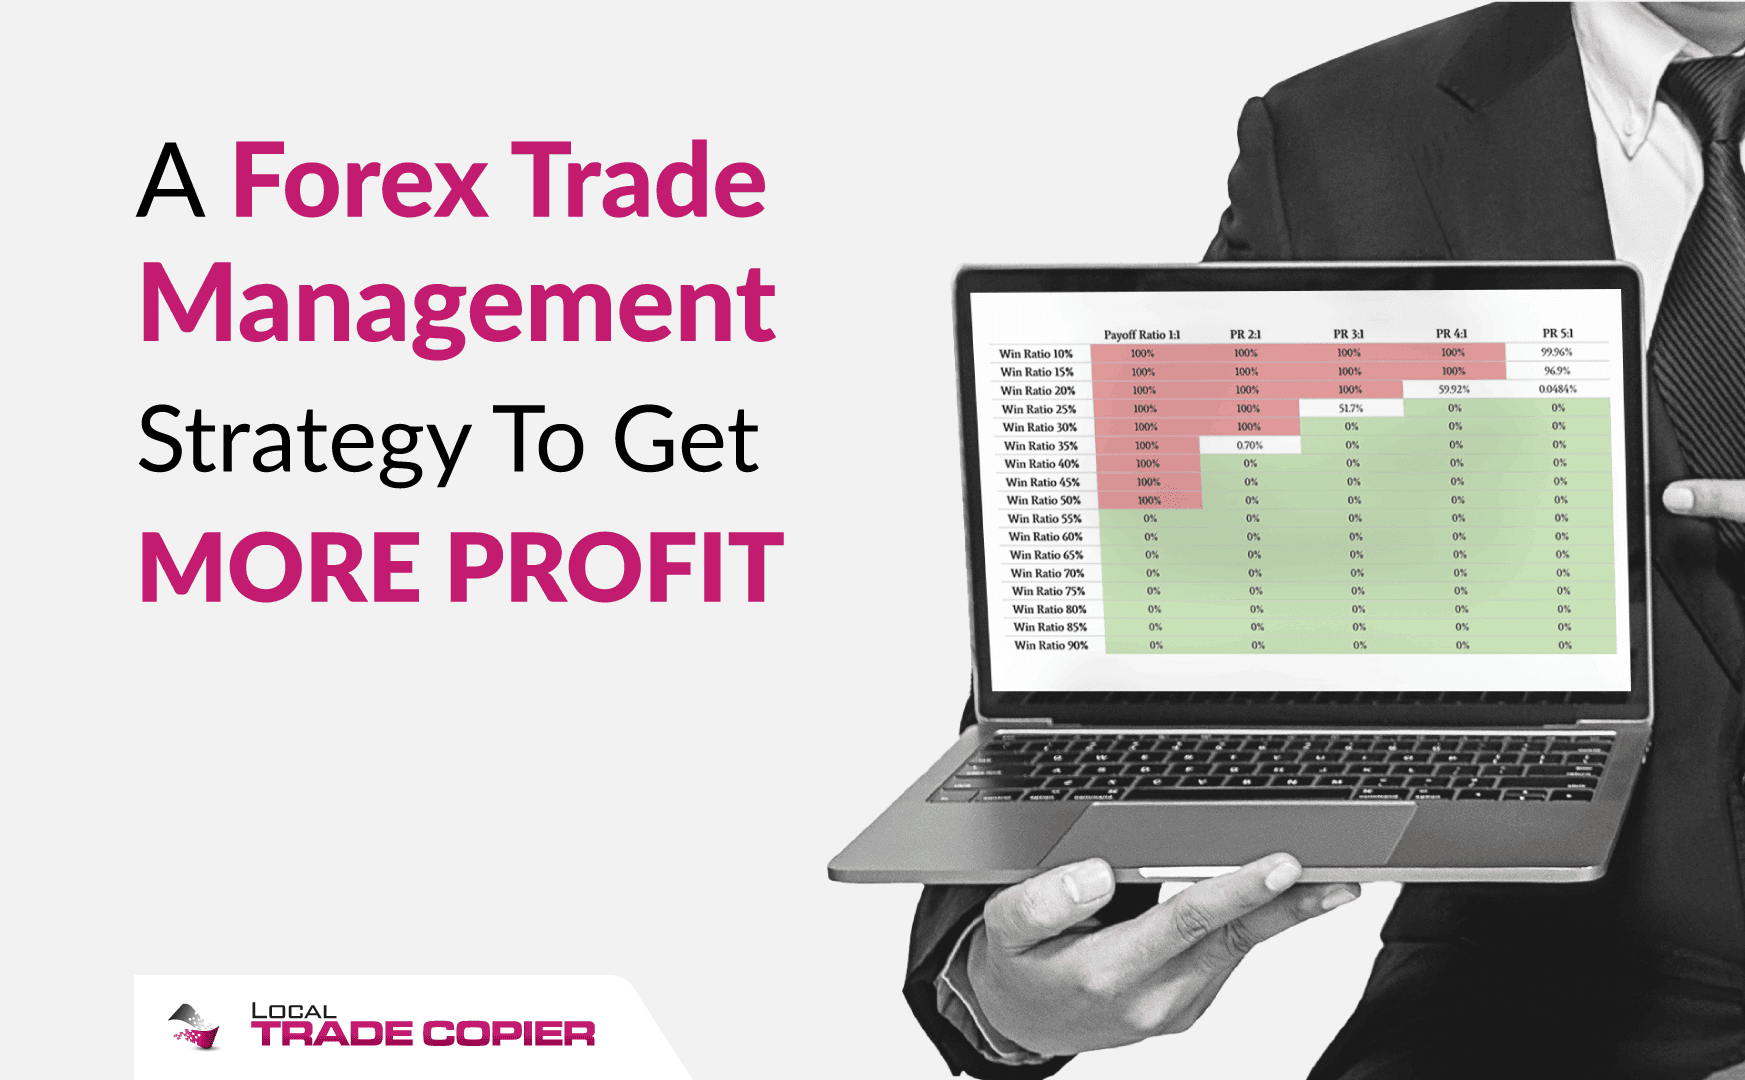 A Forex Trade Management Strategy To Get More Profit